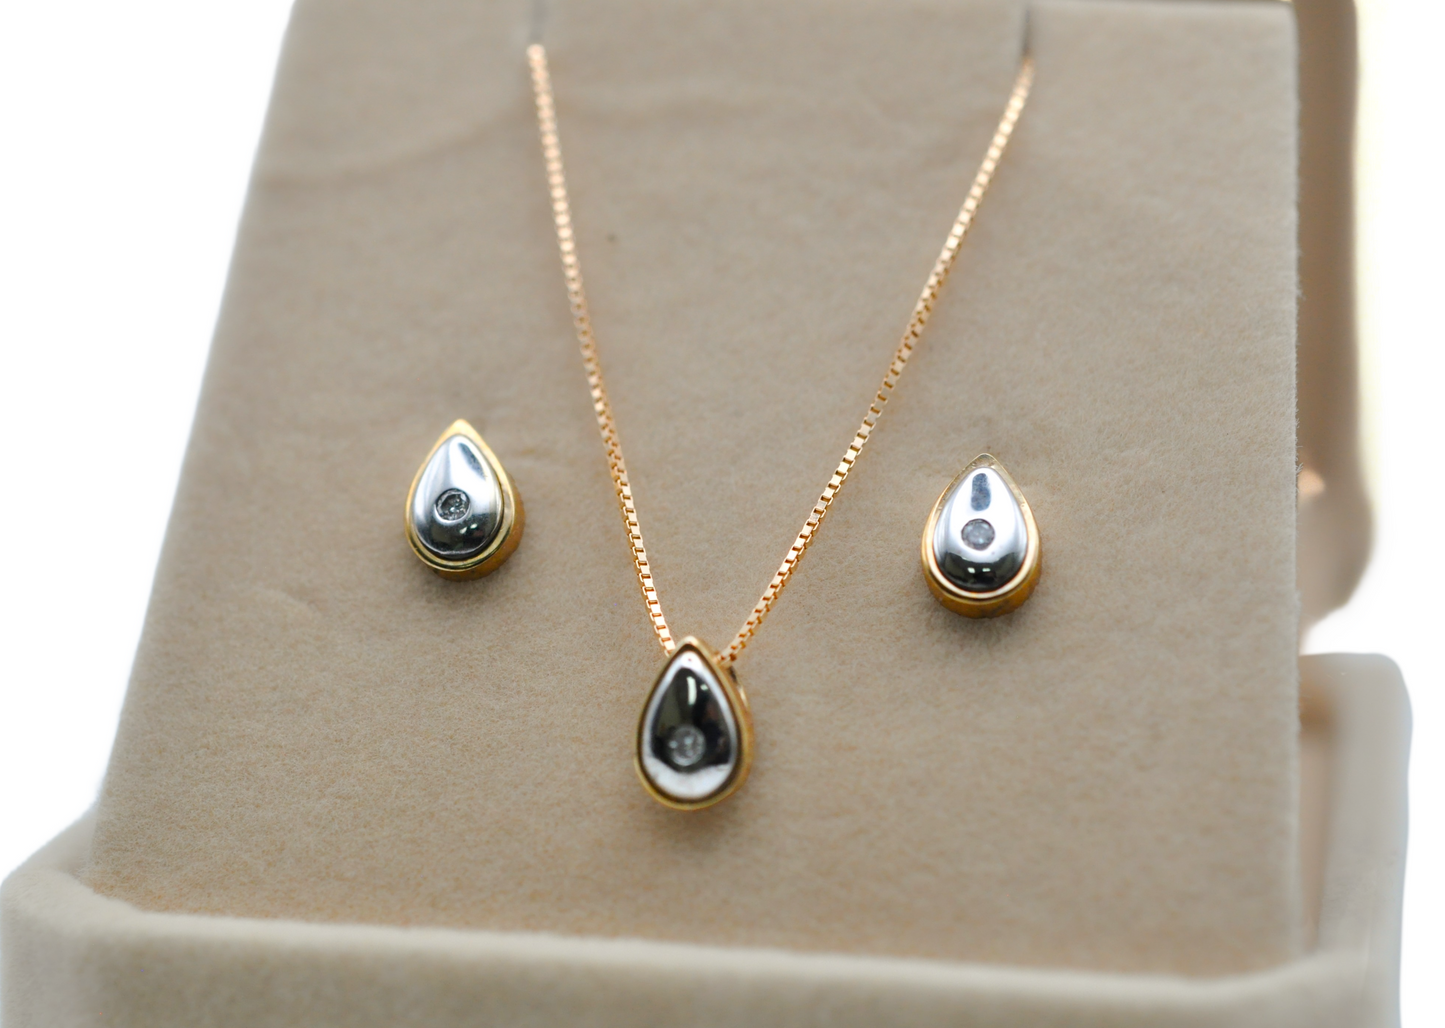 White and Yellow Gold Pear Shaped Earring and Necklace Set with Diamond Accents